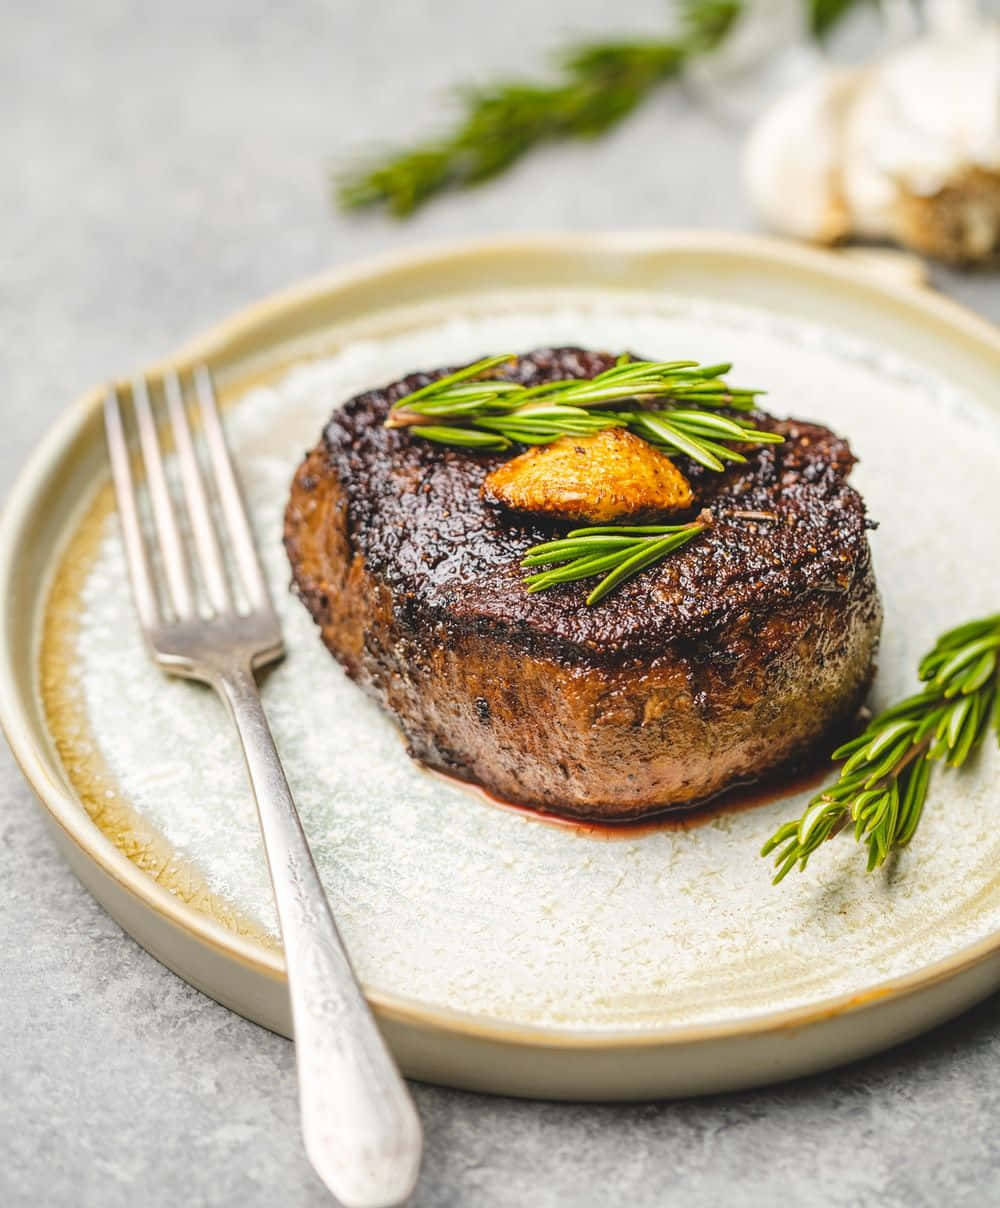 A Steak With Rosemary On A Plate